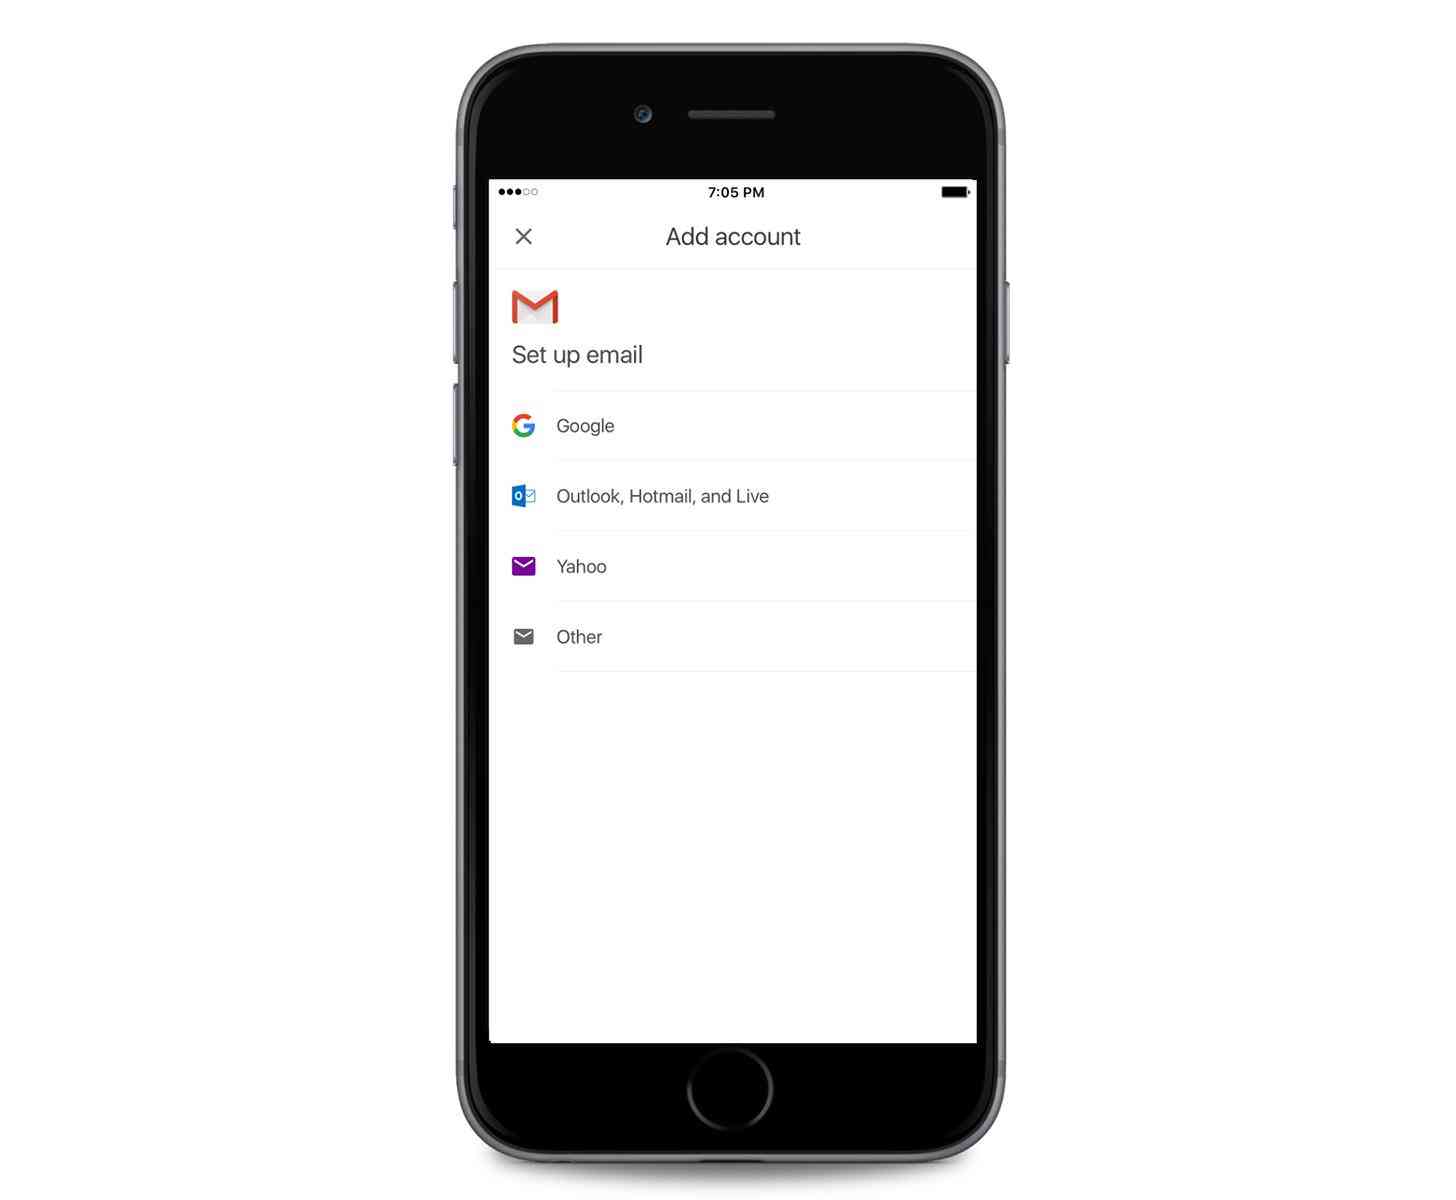 Gmail for iOS non-Google email account support